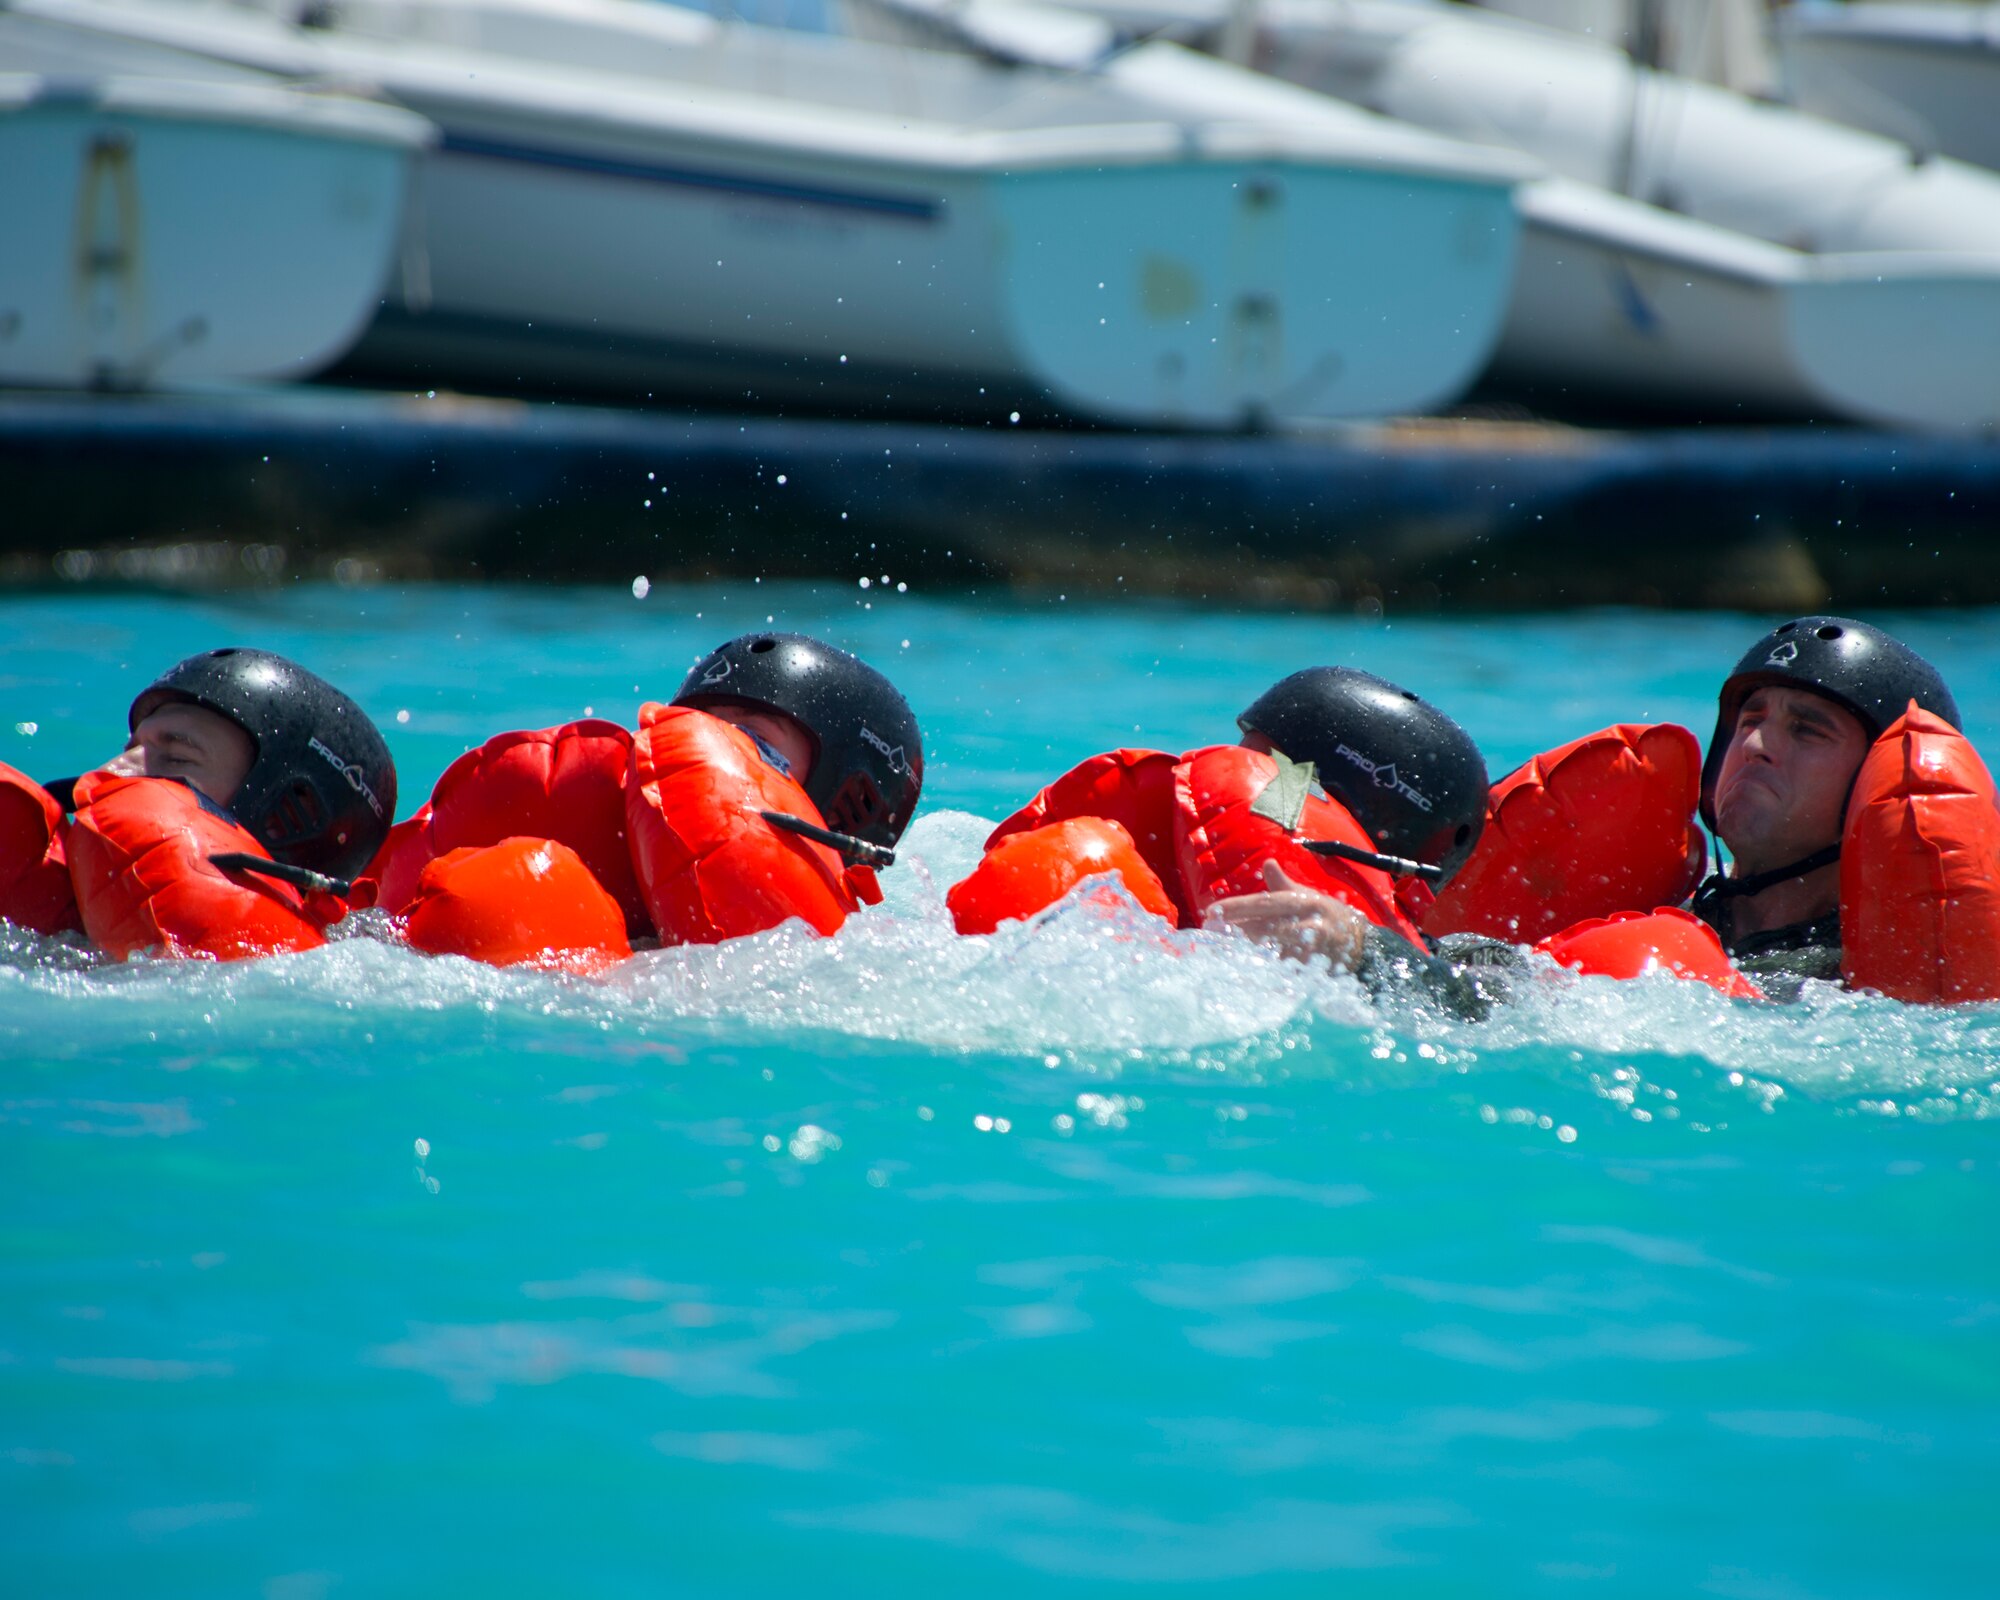 Airmen from the 535th Airlift Squadron, 65th Airlift Squadron and the 96th Air Refueling Squadron, swim as a team during water survival training on Joint Base Pearl Harbor-Hickam, Hawaii, March 23, 2015. Airmen are linked together by wrapping their legs around the person in front, keeping everyone together as they swim to a life raft. This method of swimming together ensures everyone is accounted for and will assist anyone who is injured. (U.S. Air Force photo by Tech. Sgt. Aaron Oelrich/Released) 